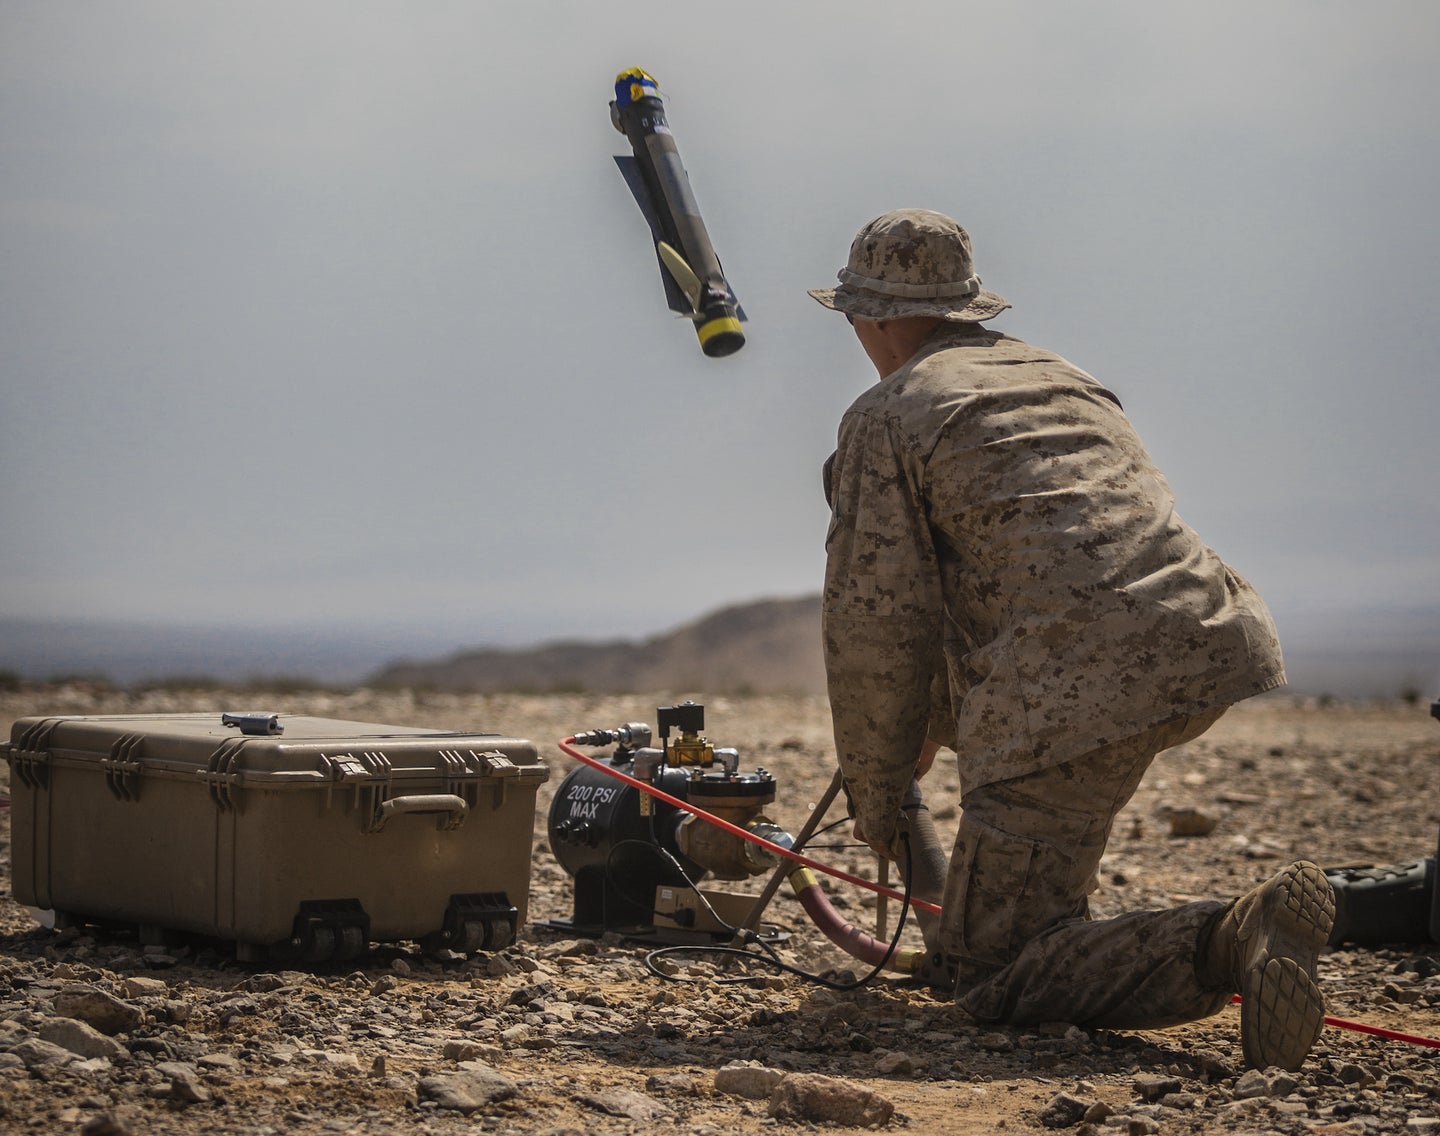 A US Marine launching a Switchblade 300 drone during training in desert terrain.